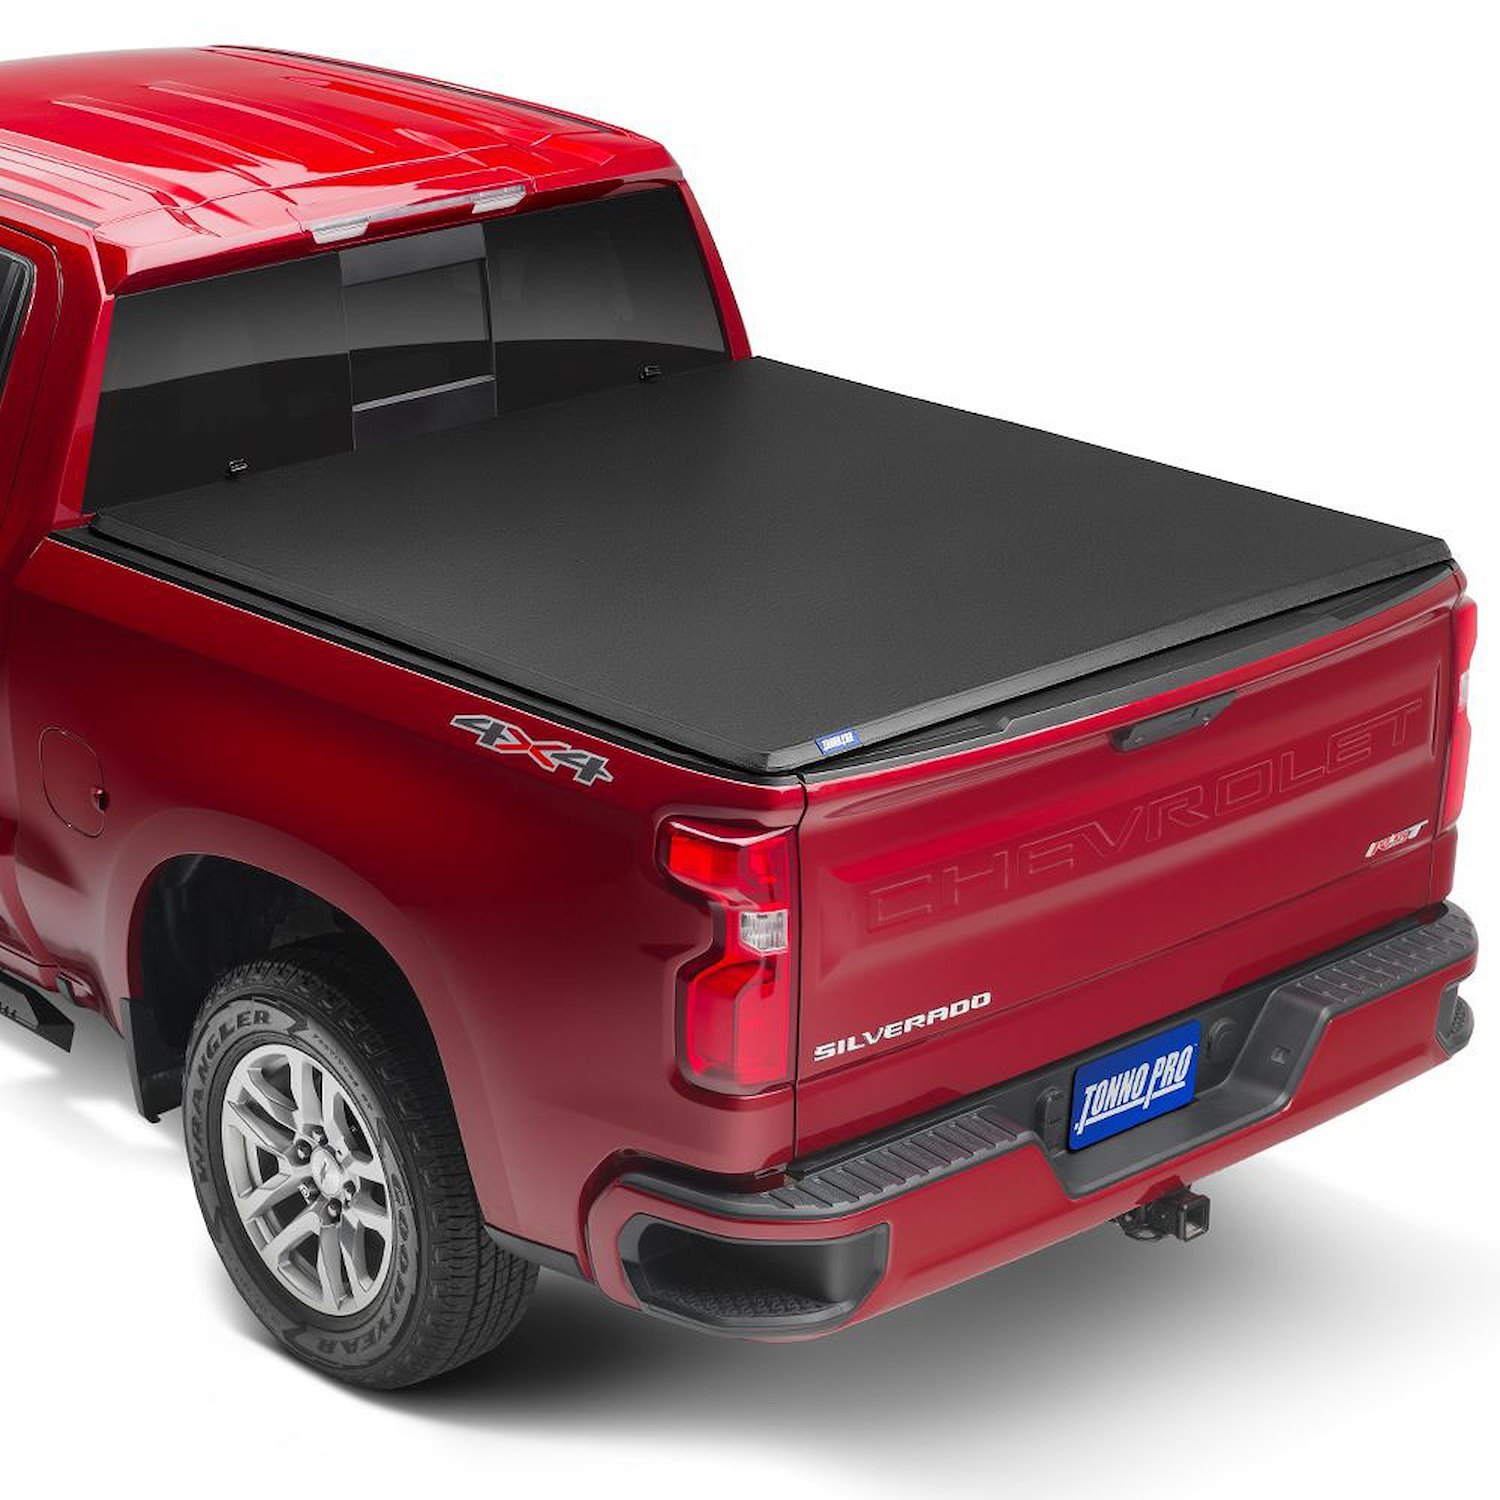 Soft Vinyl Trifold Tonneau Cover 2005-14 Tacoma Double Cab with Utility Track